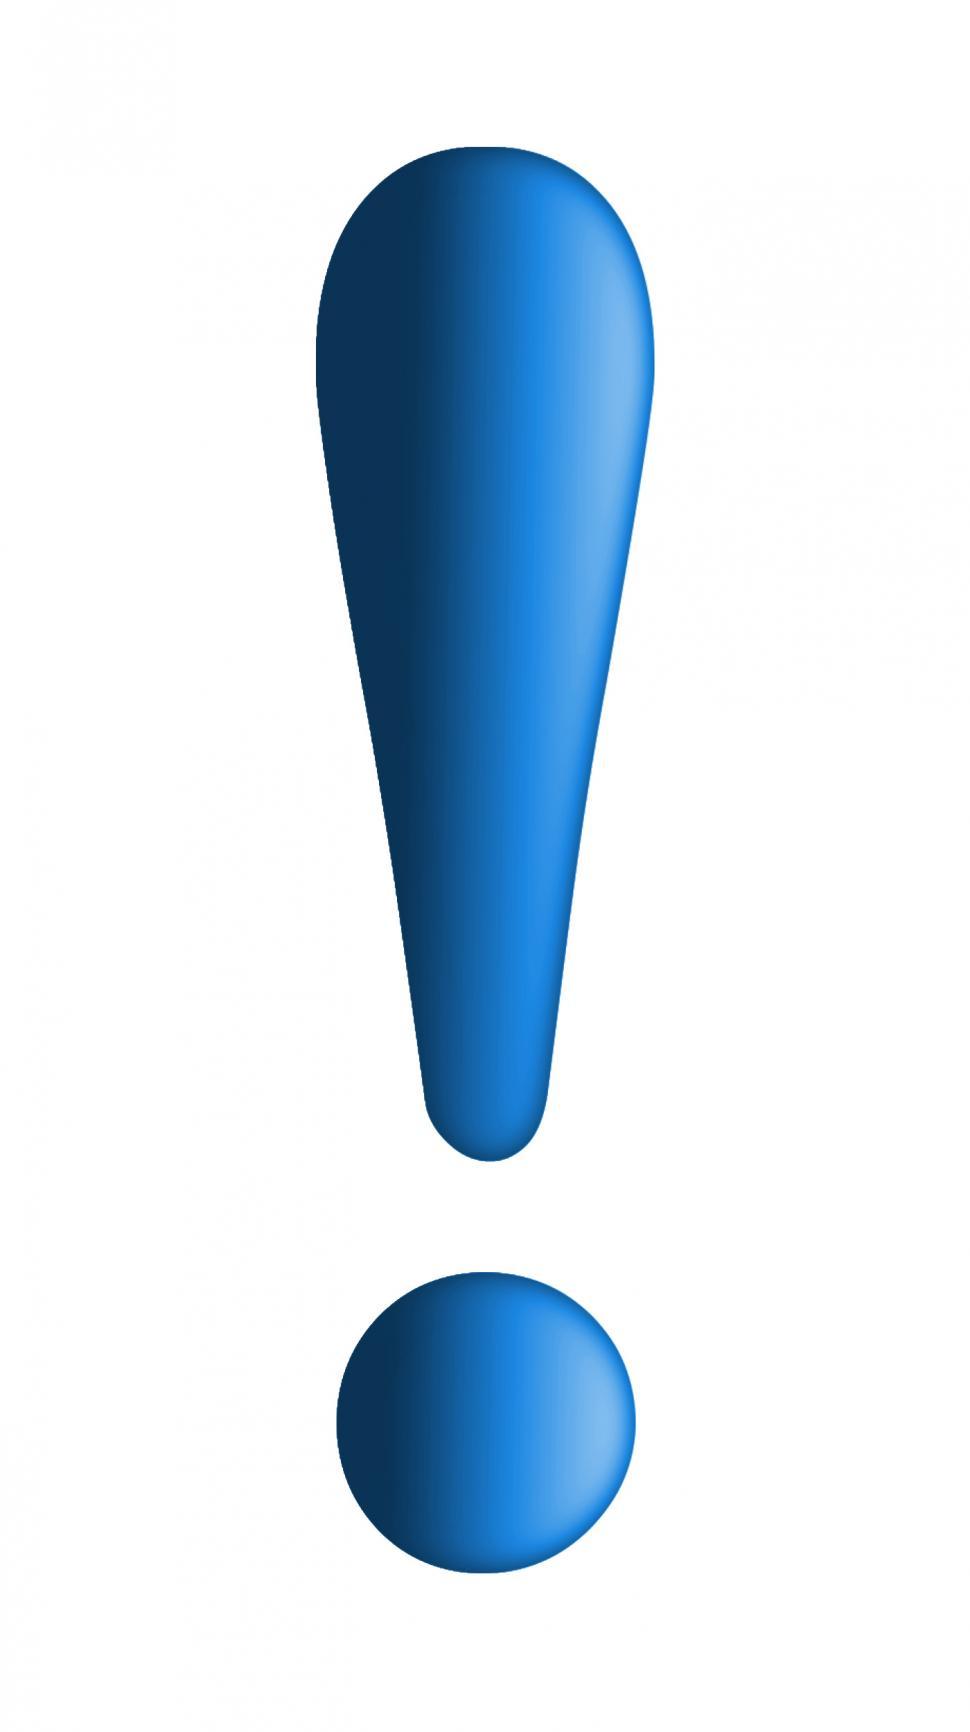 Free Image of Blue Exclamation Point 